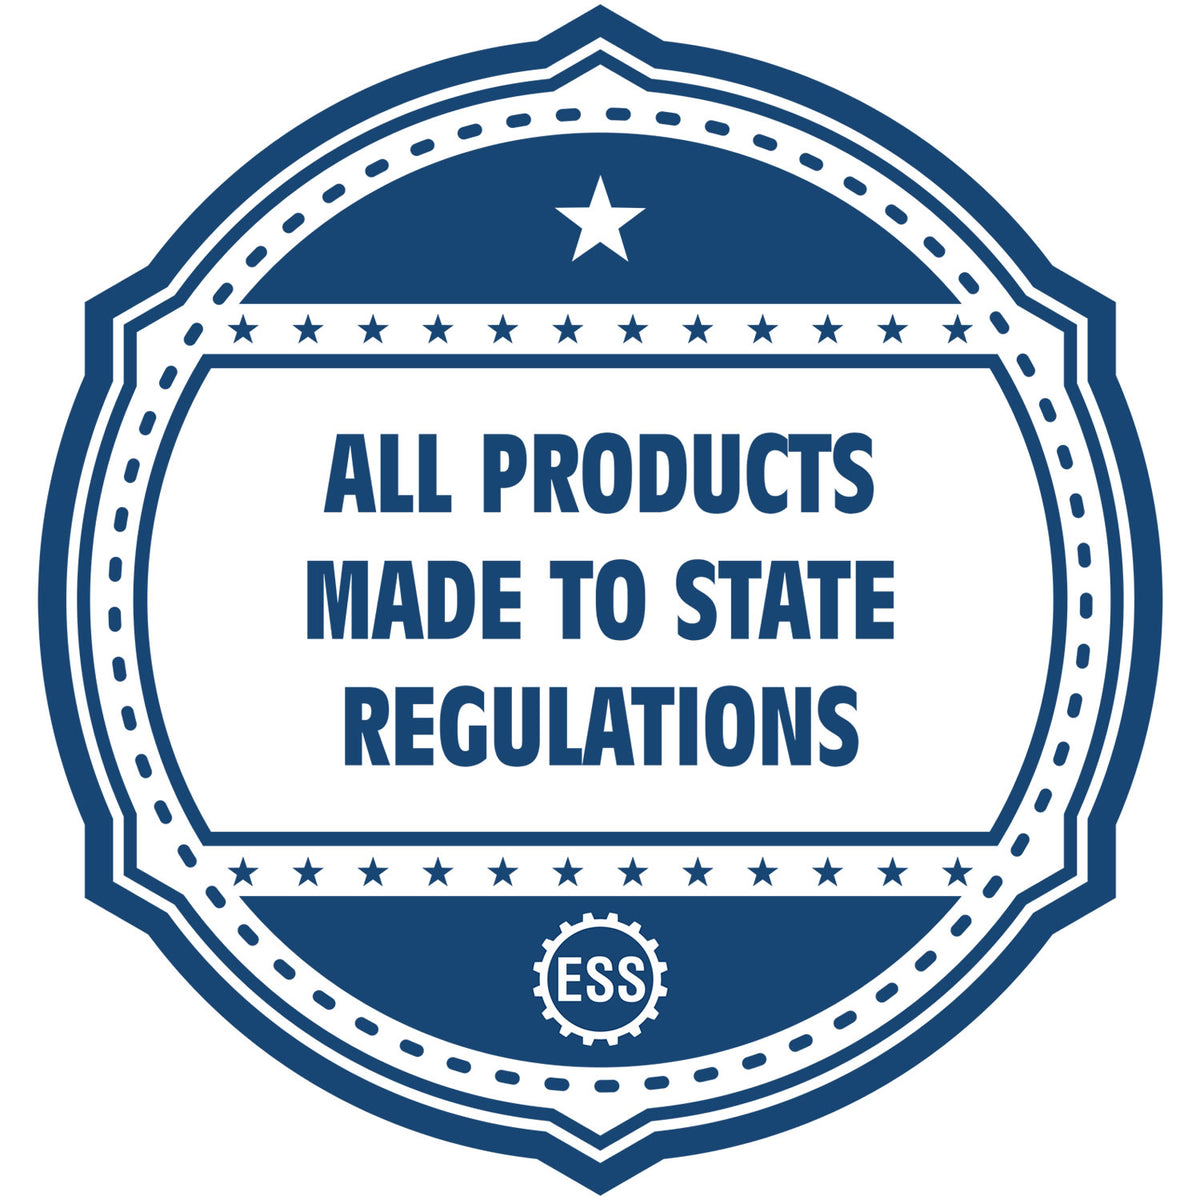 An icon or badge element for the State of Oklahoma Soft Land Surveyor Embossing Seal showing that this product is made in compliance with state regulations.